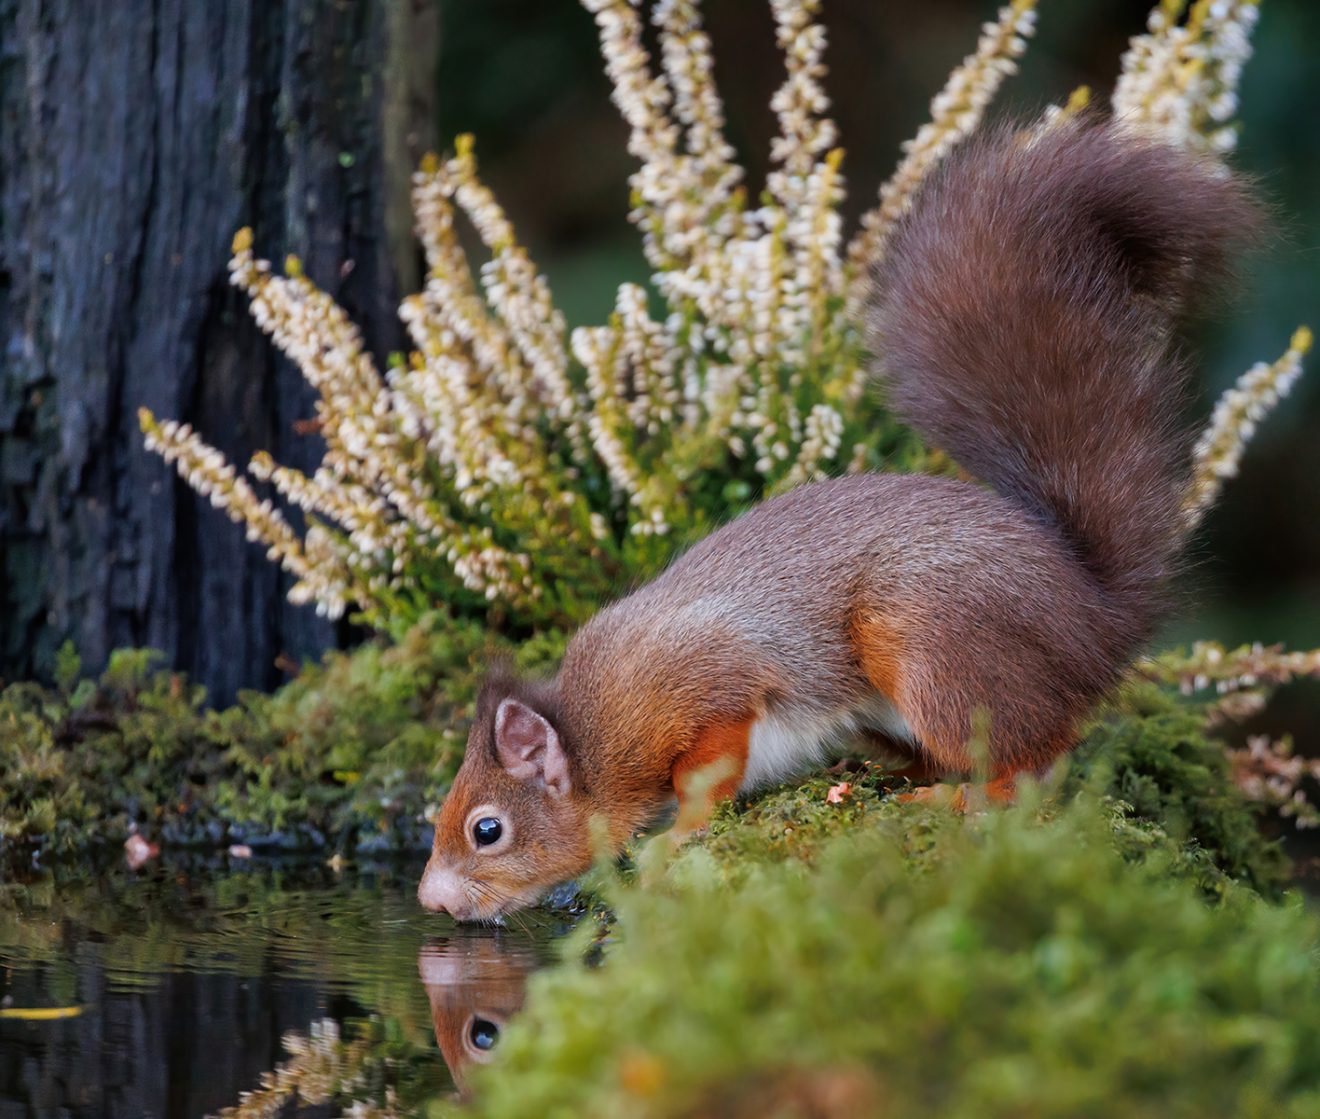 01. Second Place, Red Squirrel Drinking, Alice O'Brien, Dublin CC